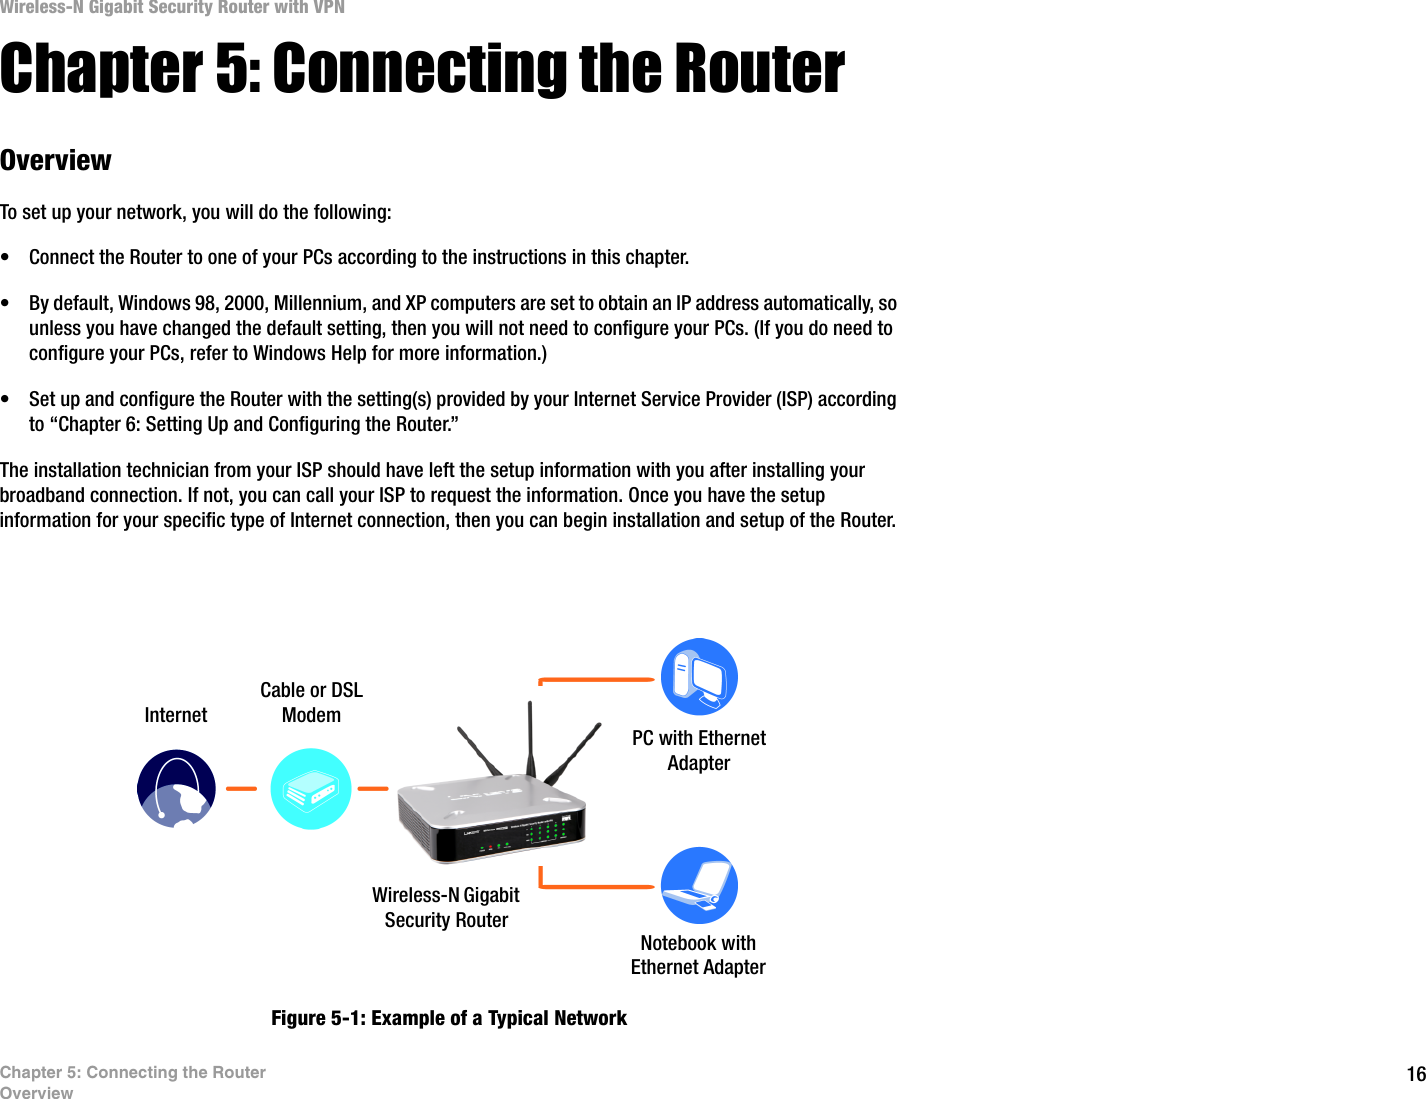 16Chapter 5: Connecting the RouterOverviewWireless-N Gigabit Security Router with VPNChapter 5: Connecting the RouterOverviewTo set up your network, you will do the following:• Connect the Router to one of your PCs according to the instructions in this chapter.• By default, Windows 98, 2000, Millennium, and XP computers are set to obtain an IP address automatically, so unless you have changed the default setting, then you will not need to configure your PCs. (If you do need to configure your PCs, refer to Windows Help for more information.)• Set up and configure the Router with the setting(s) provided by your Internet Service Provider (ISP) according to “Chapter 6: Setting Up and Configuring the Router.”The installation technician from your ISP should have left the setup information with you after installing your broadband connection. If not, you can call your ISP to request the information. Once you have the setup information for your specific type of Internet connection, then you can begin installation and setup of the Router.Figure 5-1: Example of a Typical Network Notebook with Ethernet AdapterPC with Ethernet AdapterCable or DSL ModemWireless-N Gigabit Security Router Internet